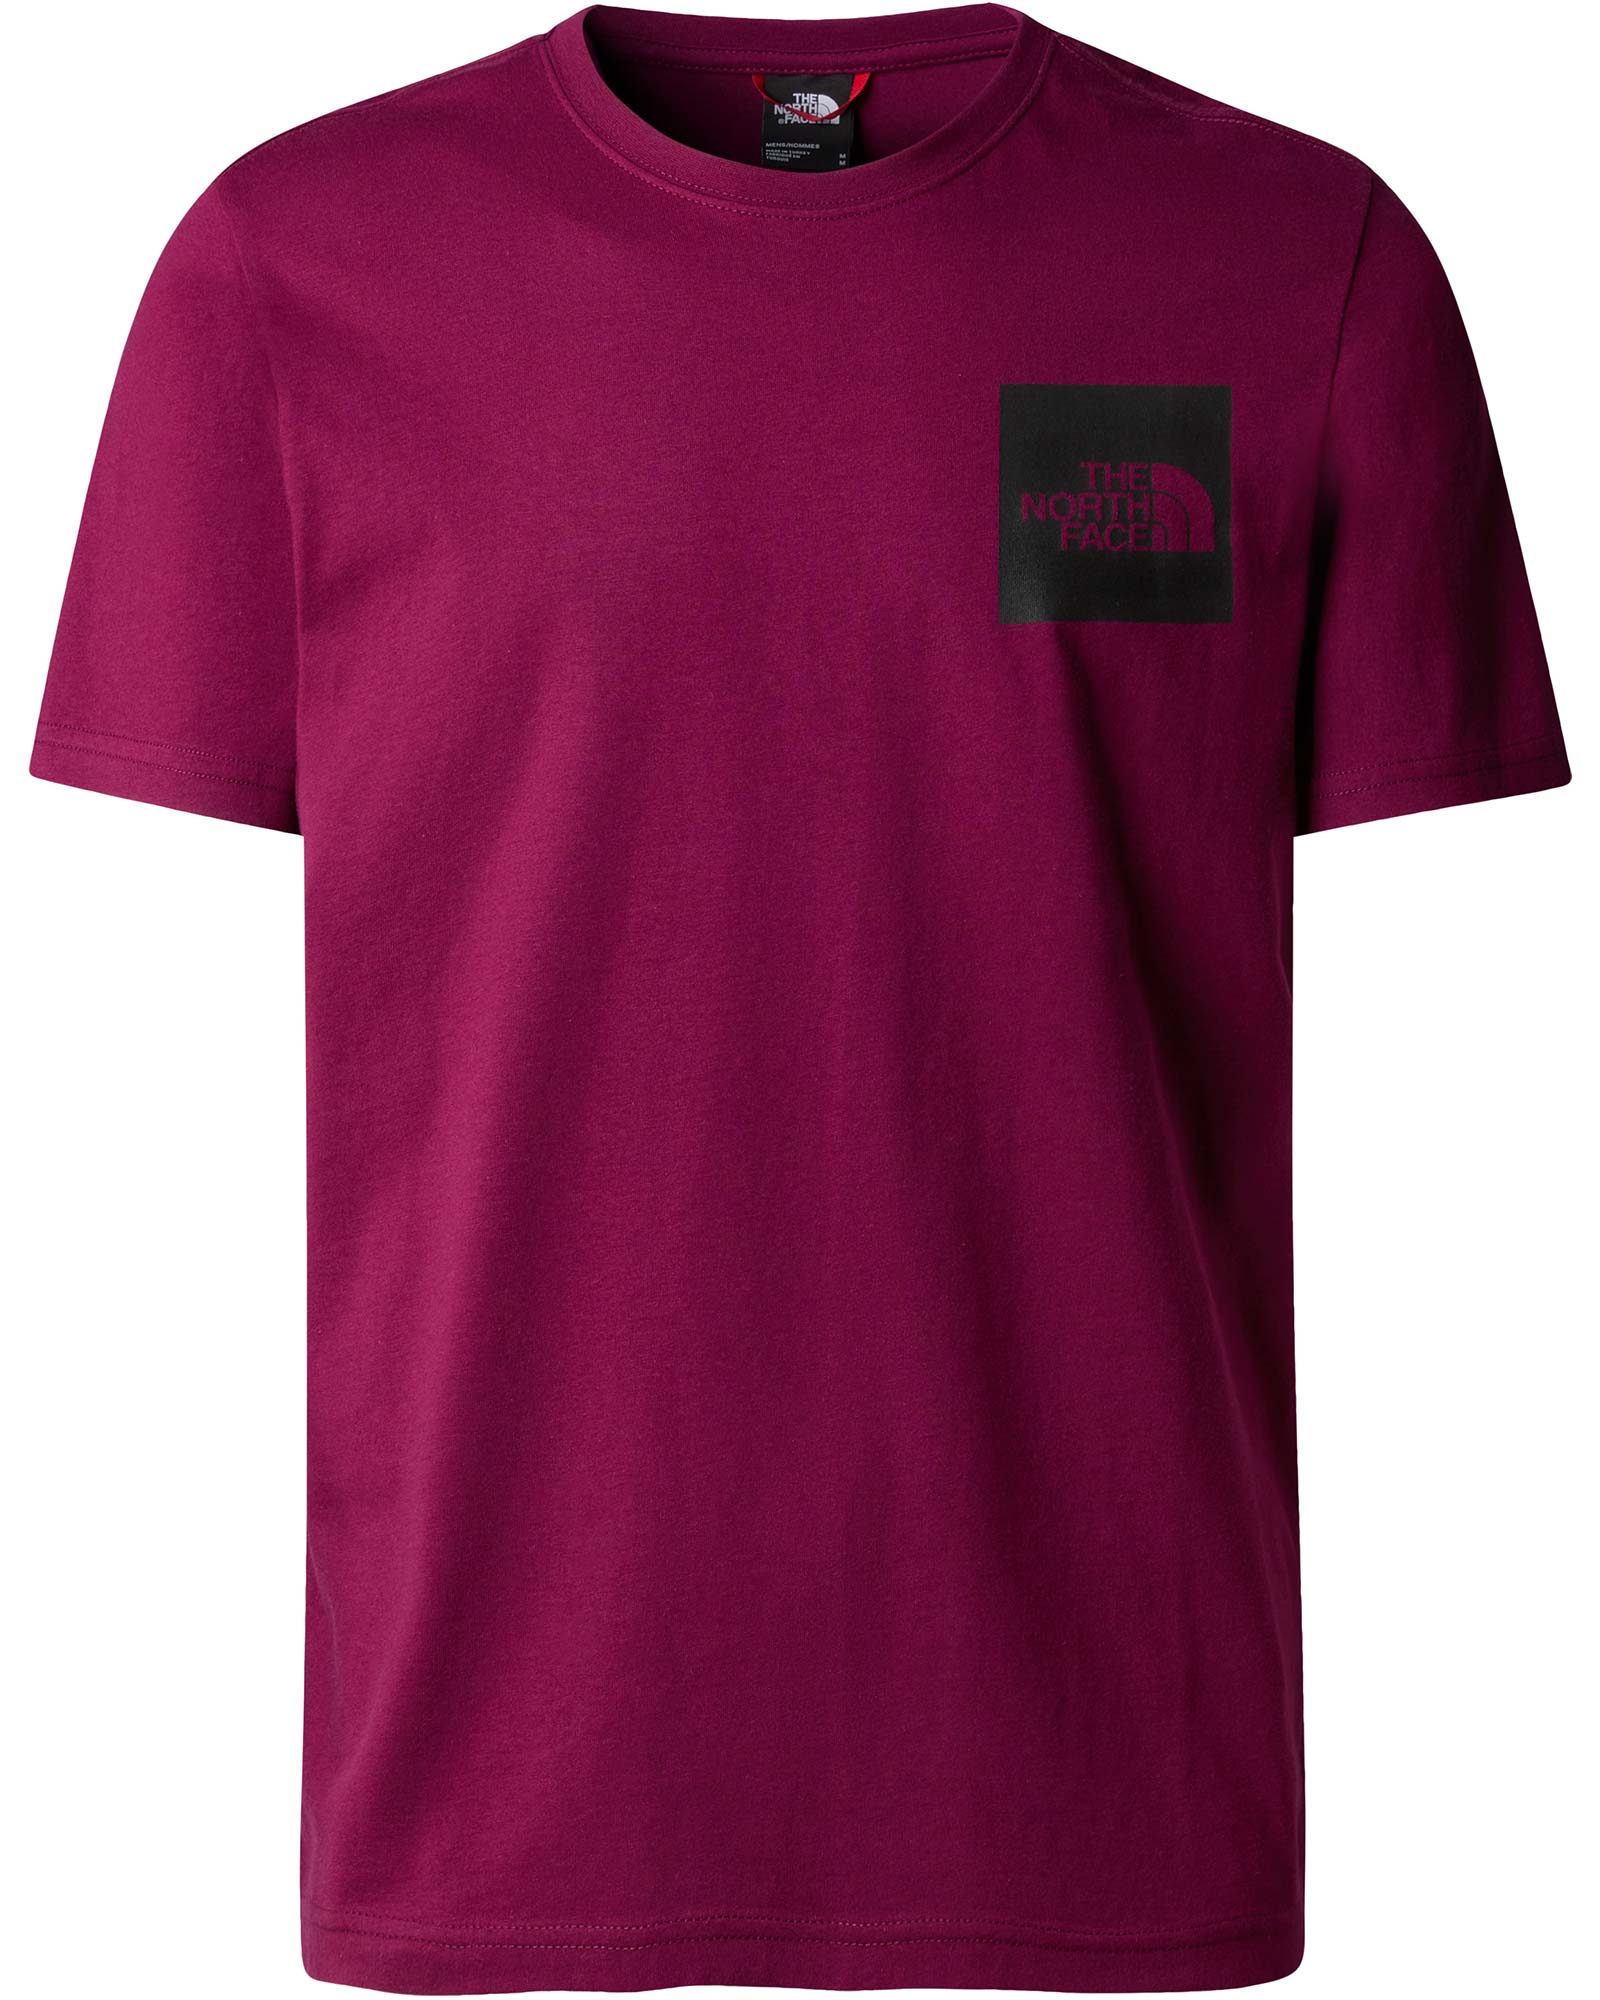 The North Face Fine Men’s Tee - Boysenberry XL